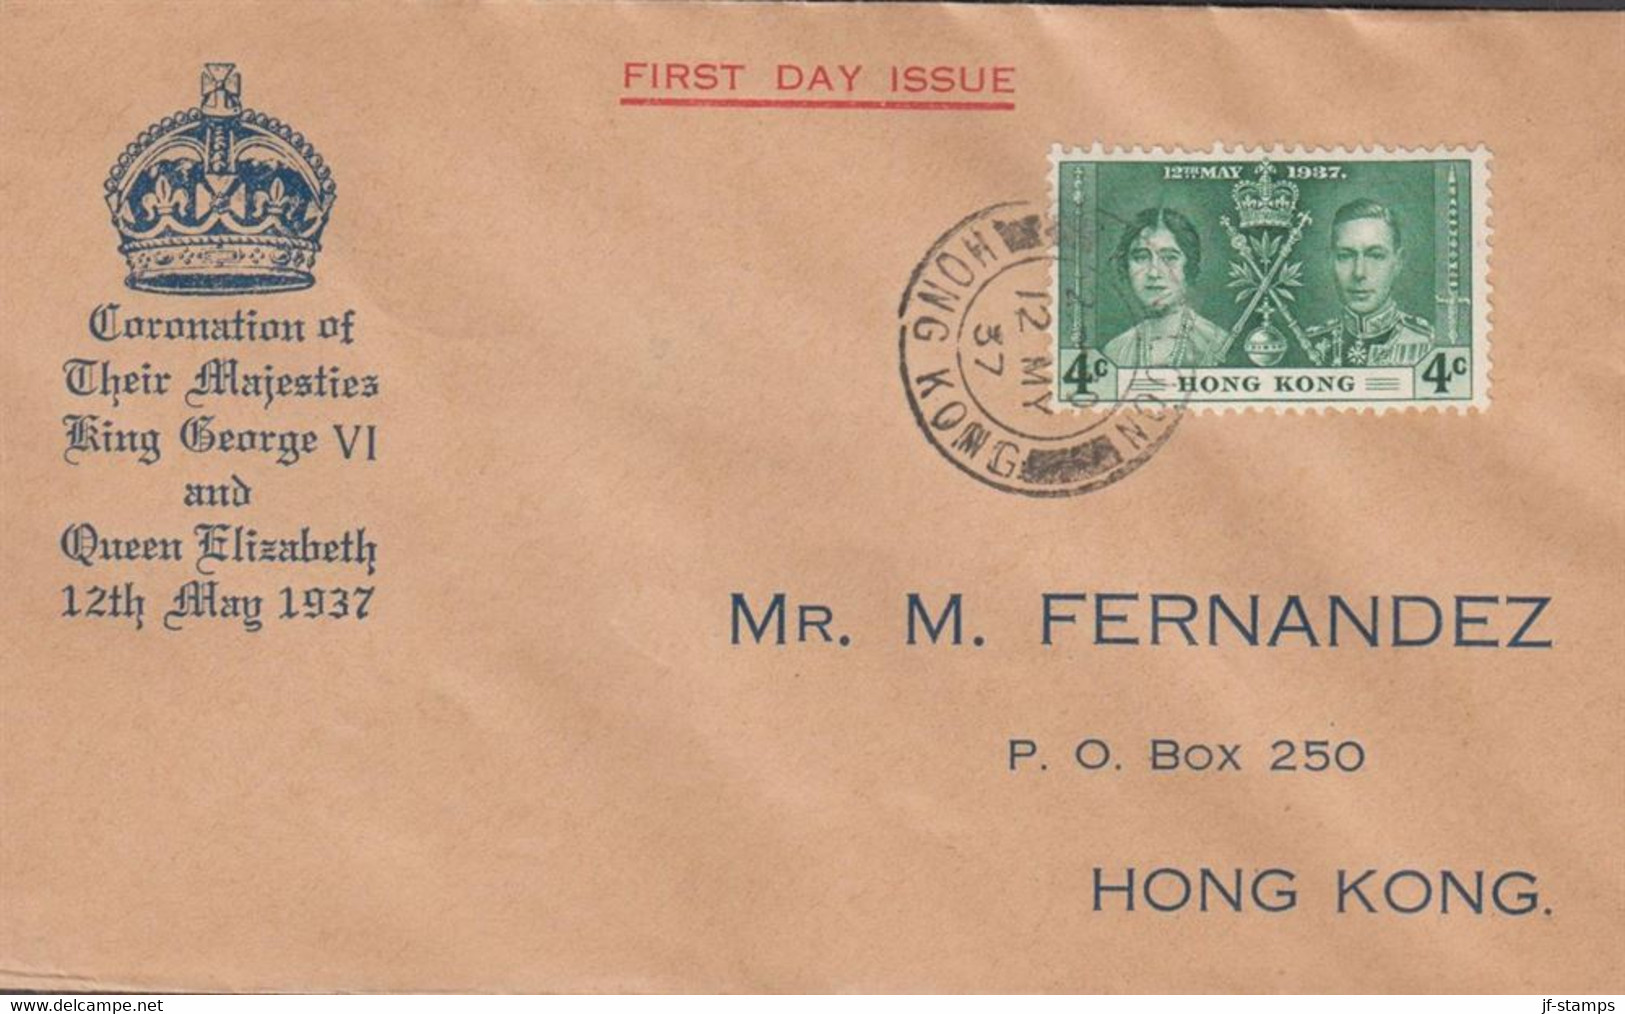 1937. HONG KONG Georg VI. 4 C Coronation On Nice FDC Cancelled FIRST DAY OF ISSUE KOWLOON HON... (Michel 136) - JF427050 - Covers & Documents